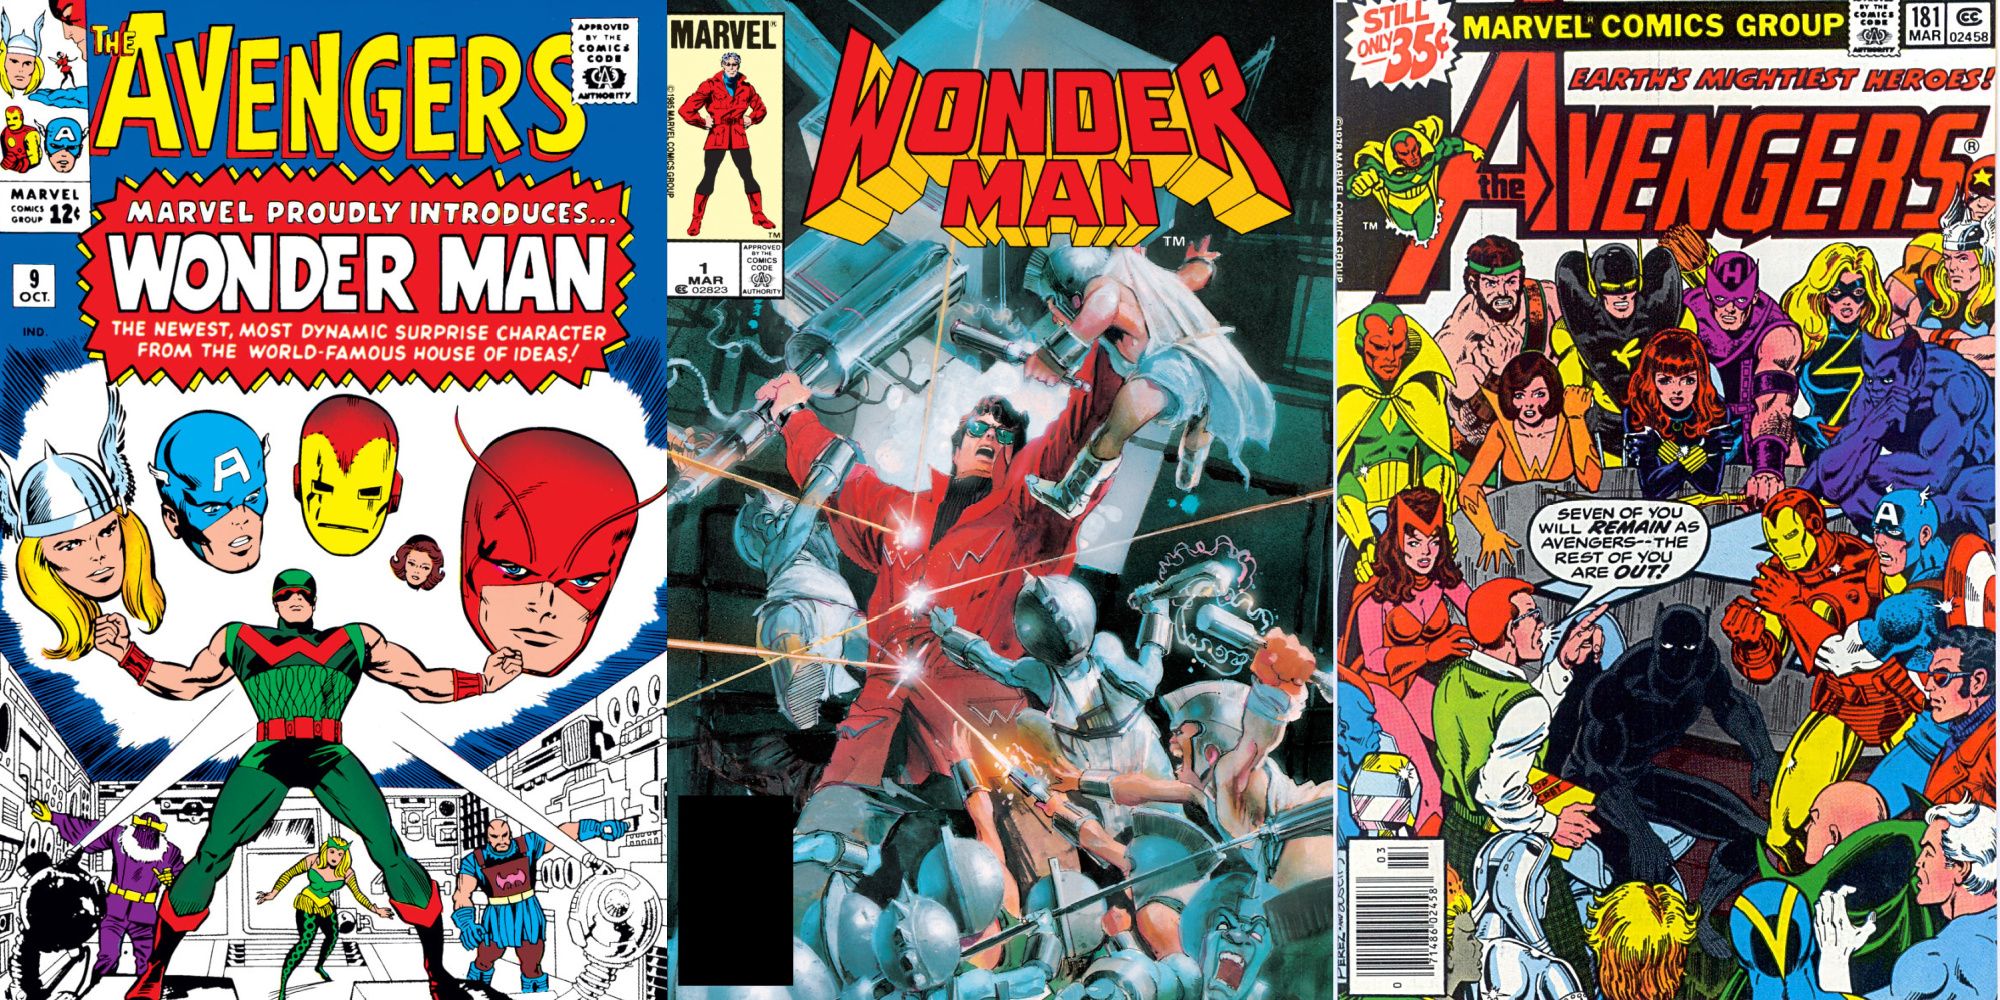 Split image of comic book covers of Avengers 9, Wonder Man 1, and Avengers 181.